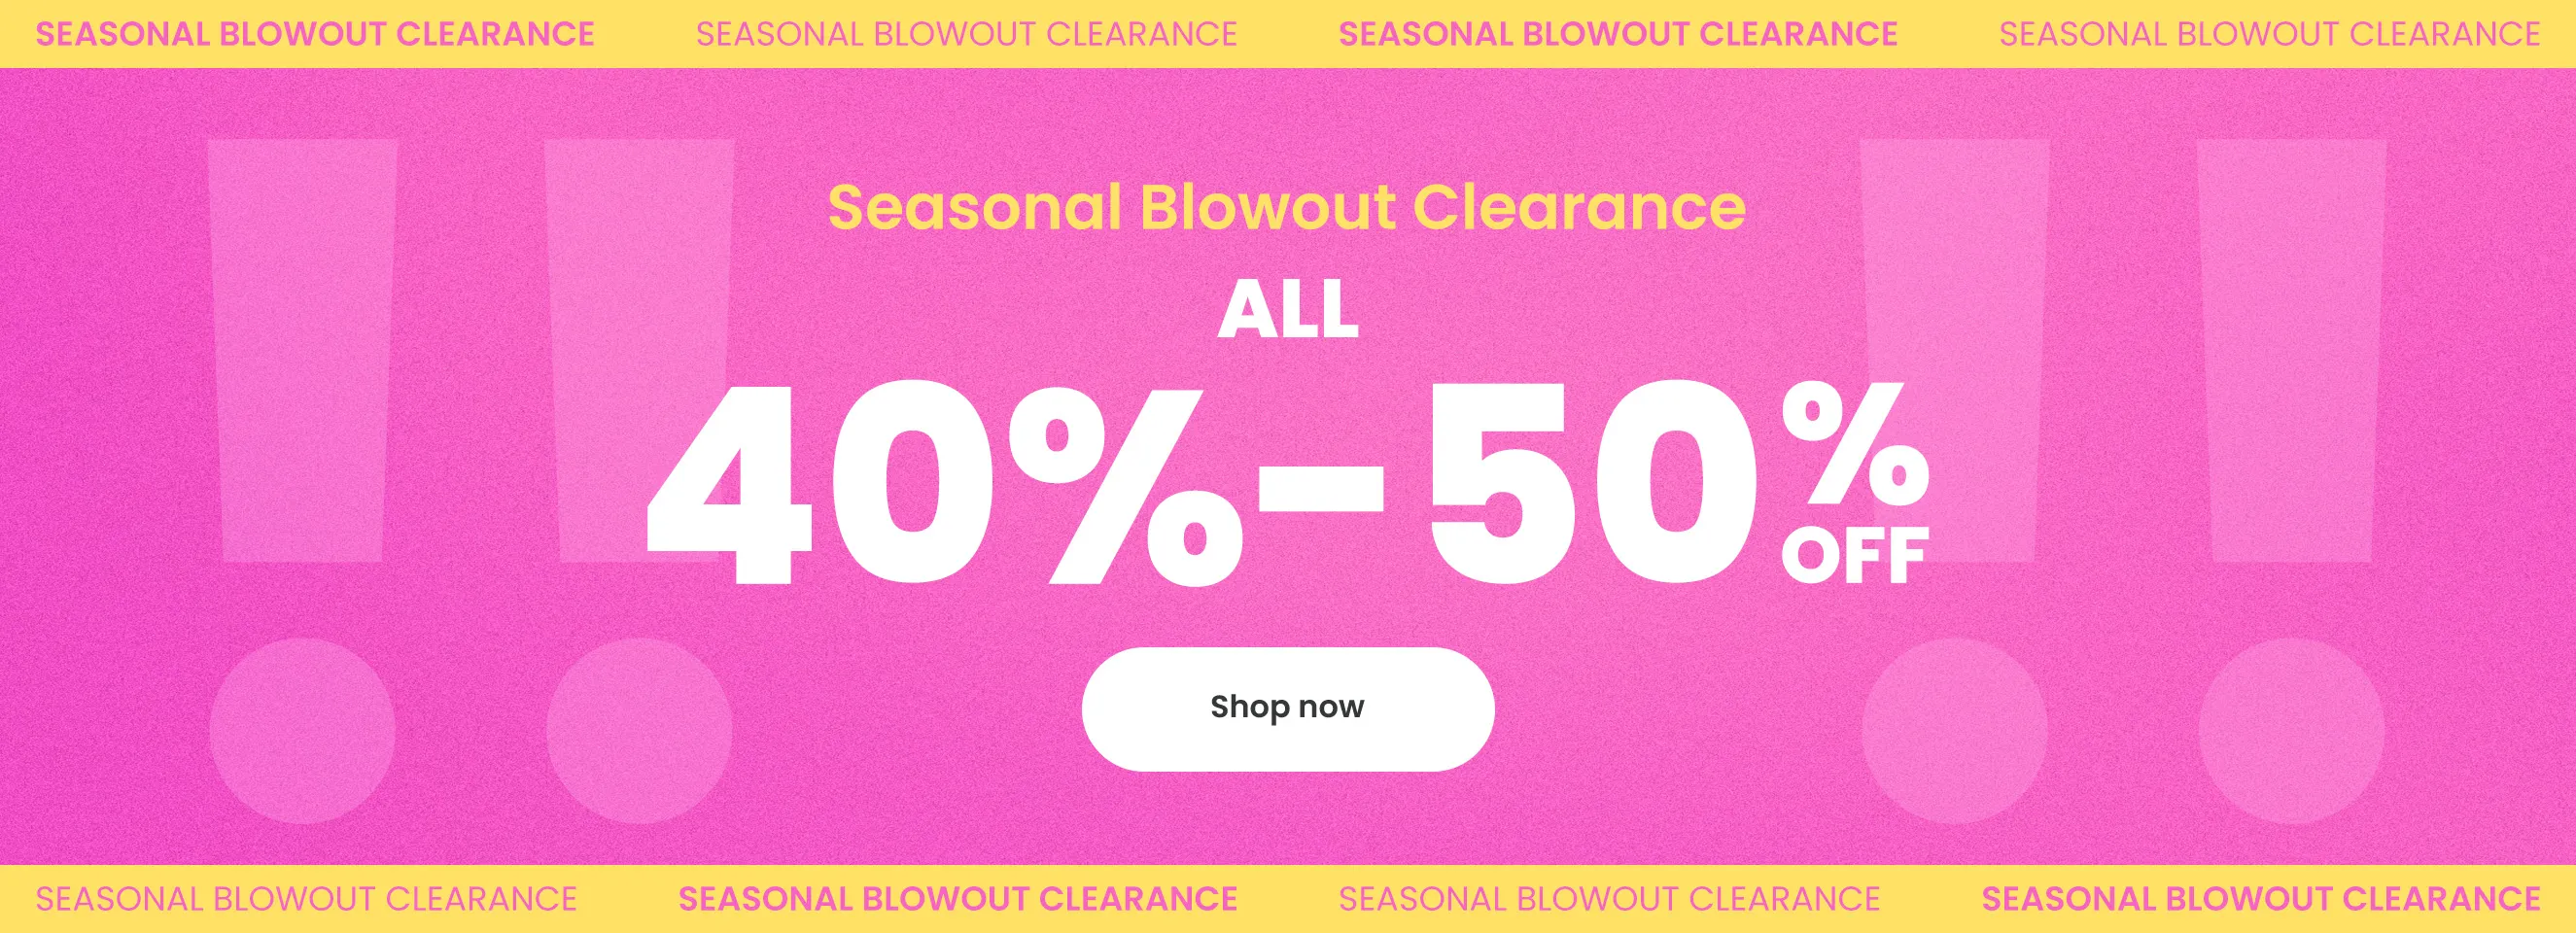 Click it to join Seasonal Clearance activity